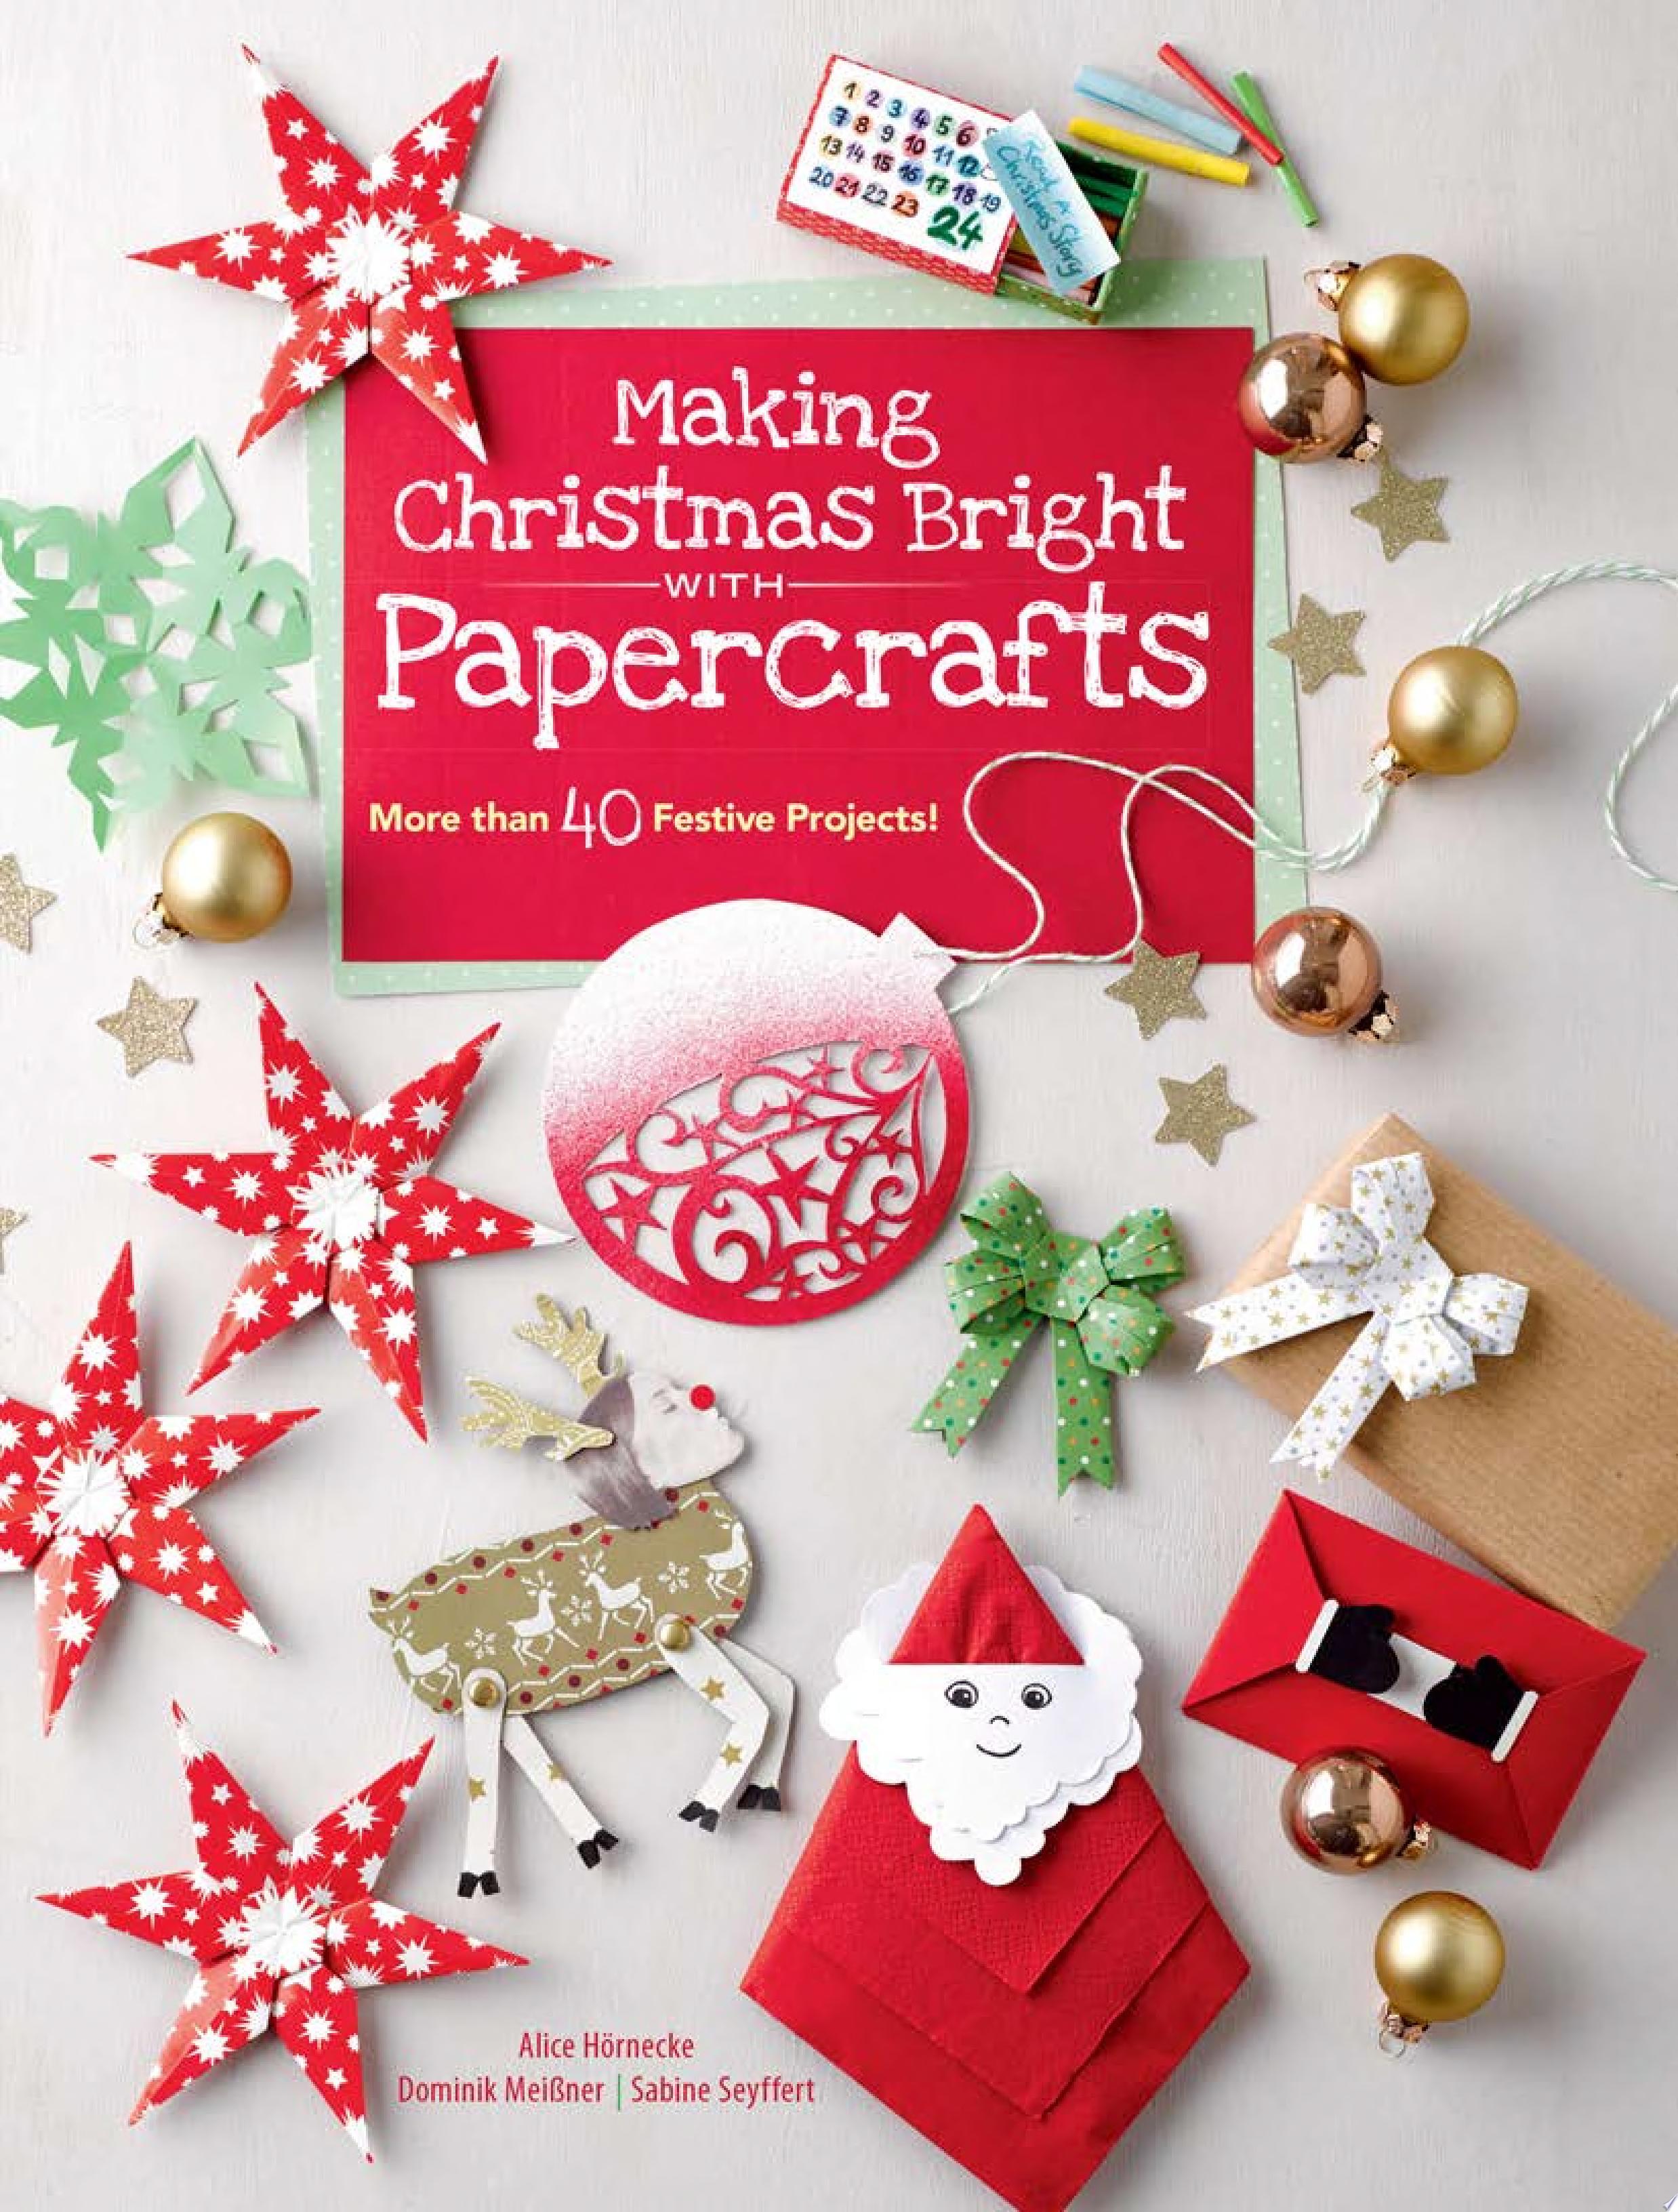 Image for "Making Christmas Bright With Papercrafts"